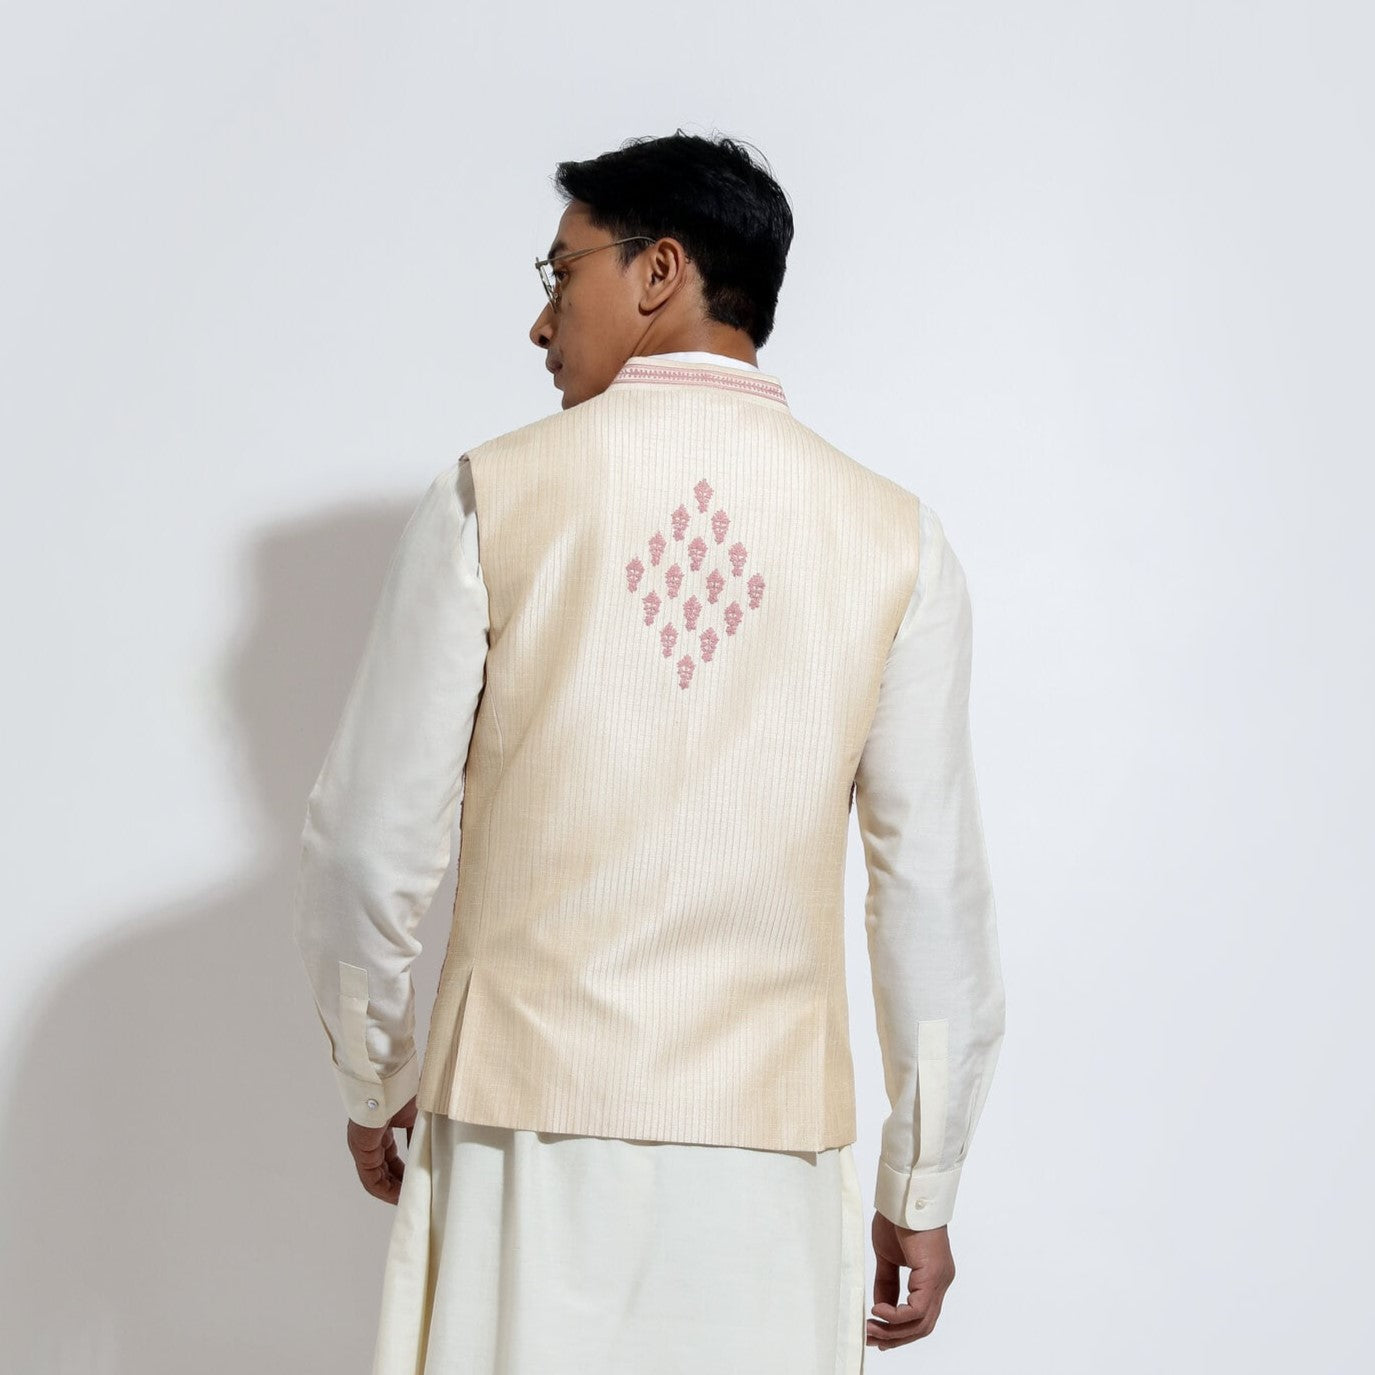 Sleeveless bandi with linear motif couching embroidery